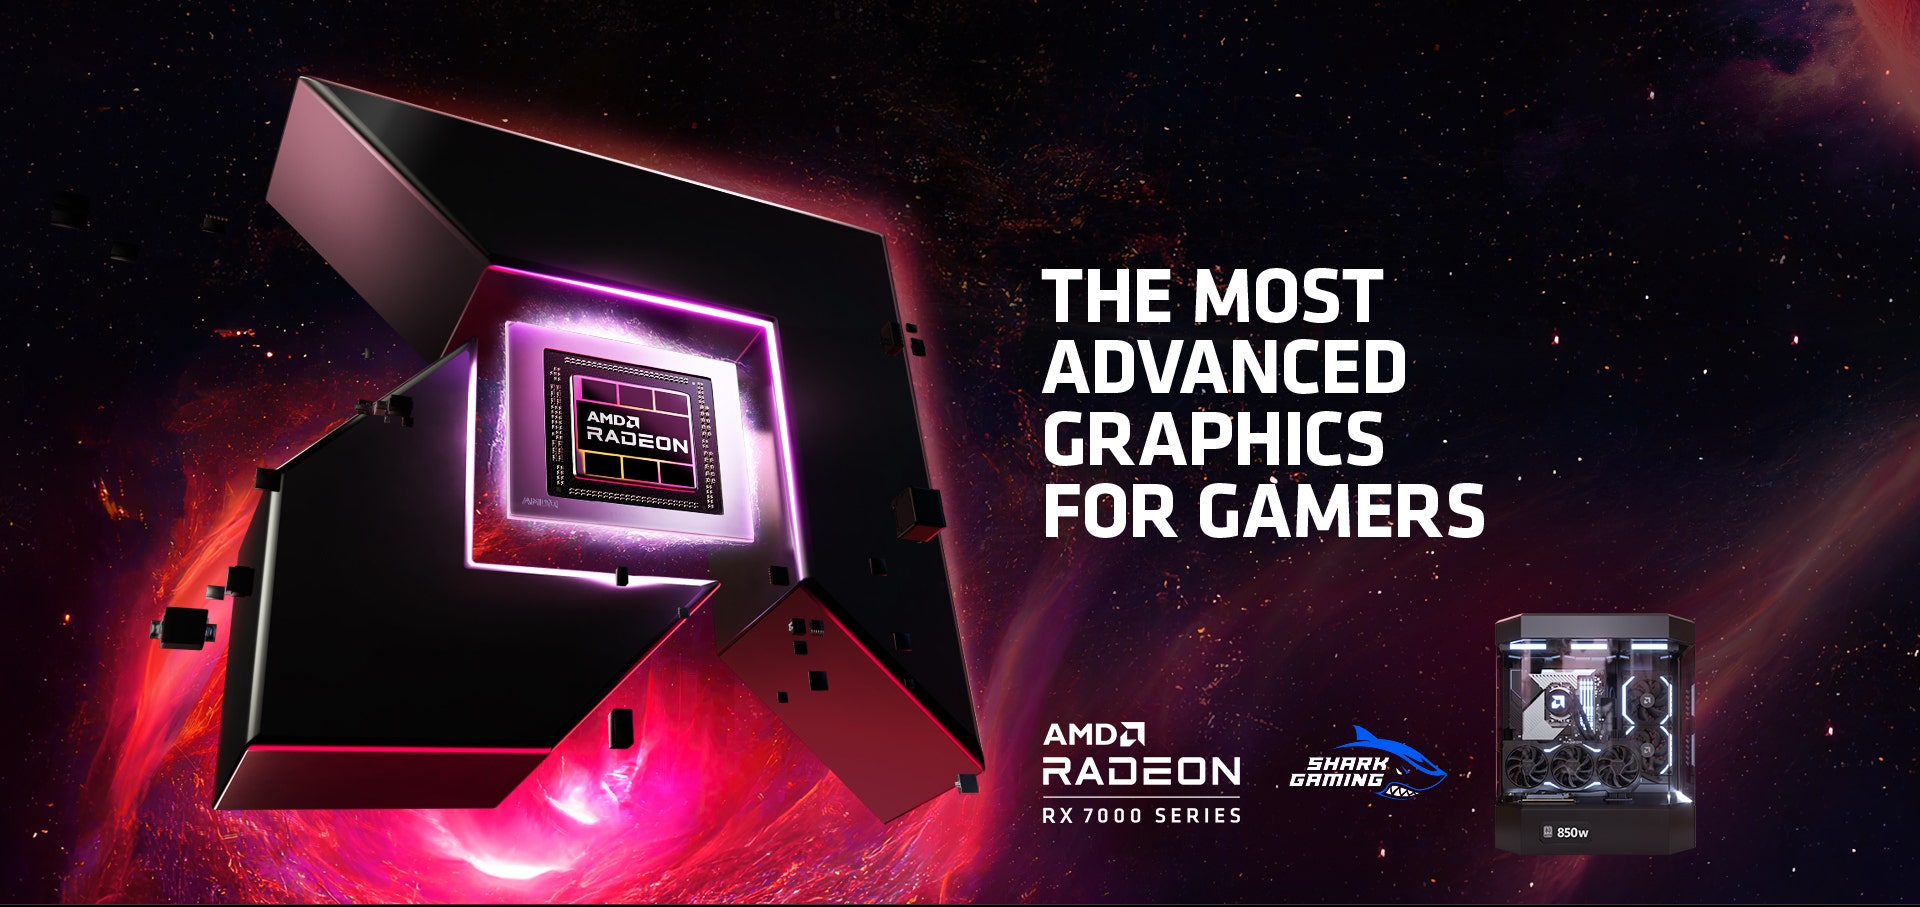 THE MOST ADVANCED GRAPHICS FOR GAMERS